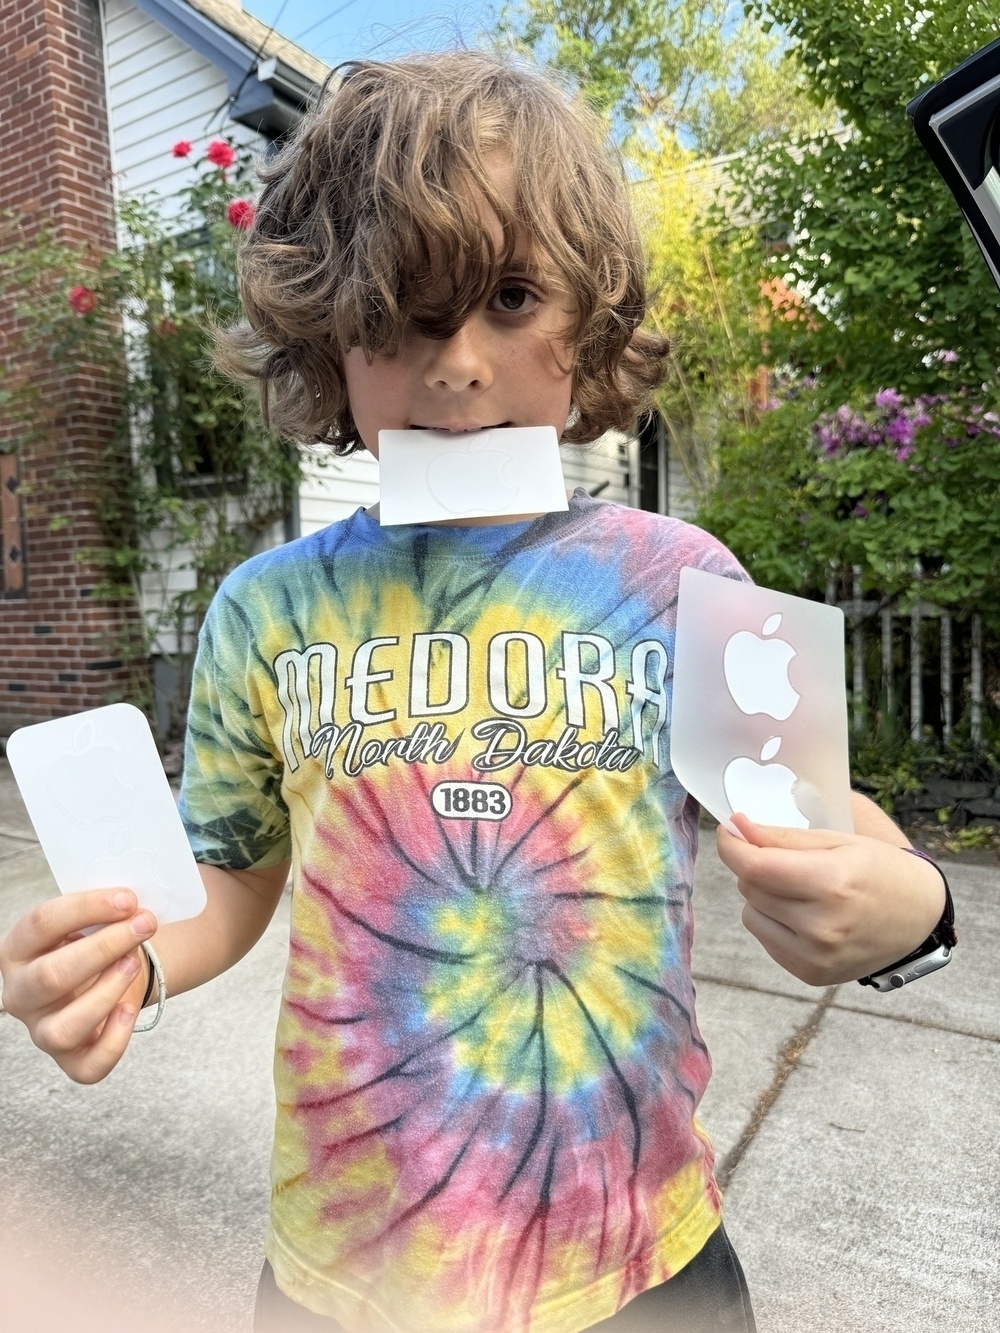 Boy wearing tie-dye tshirt with curly hair in his eyes holding stickers in both hands and his mouth.